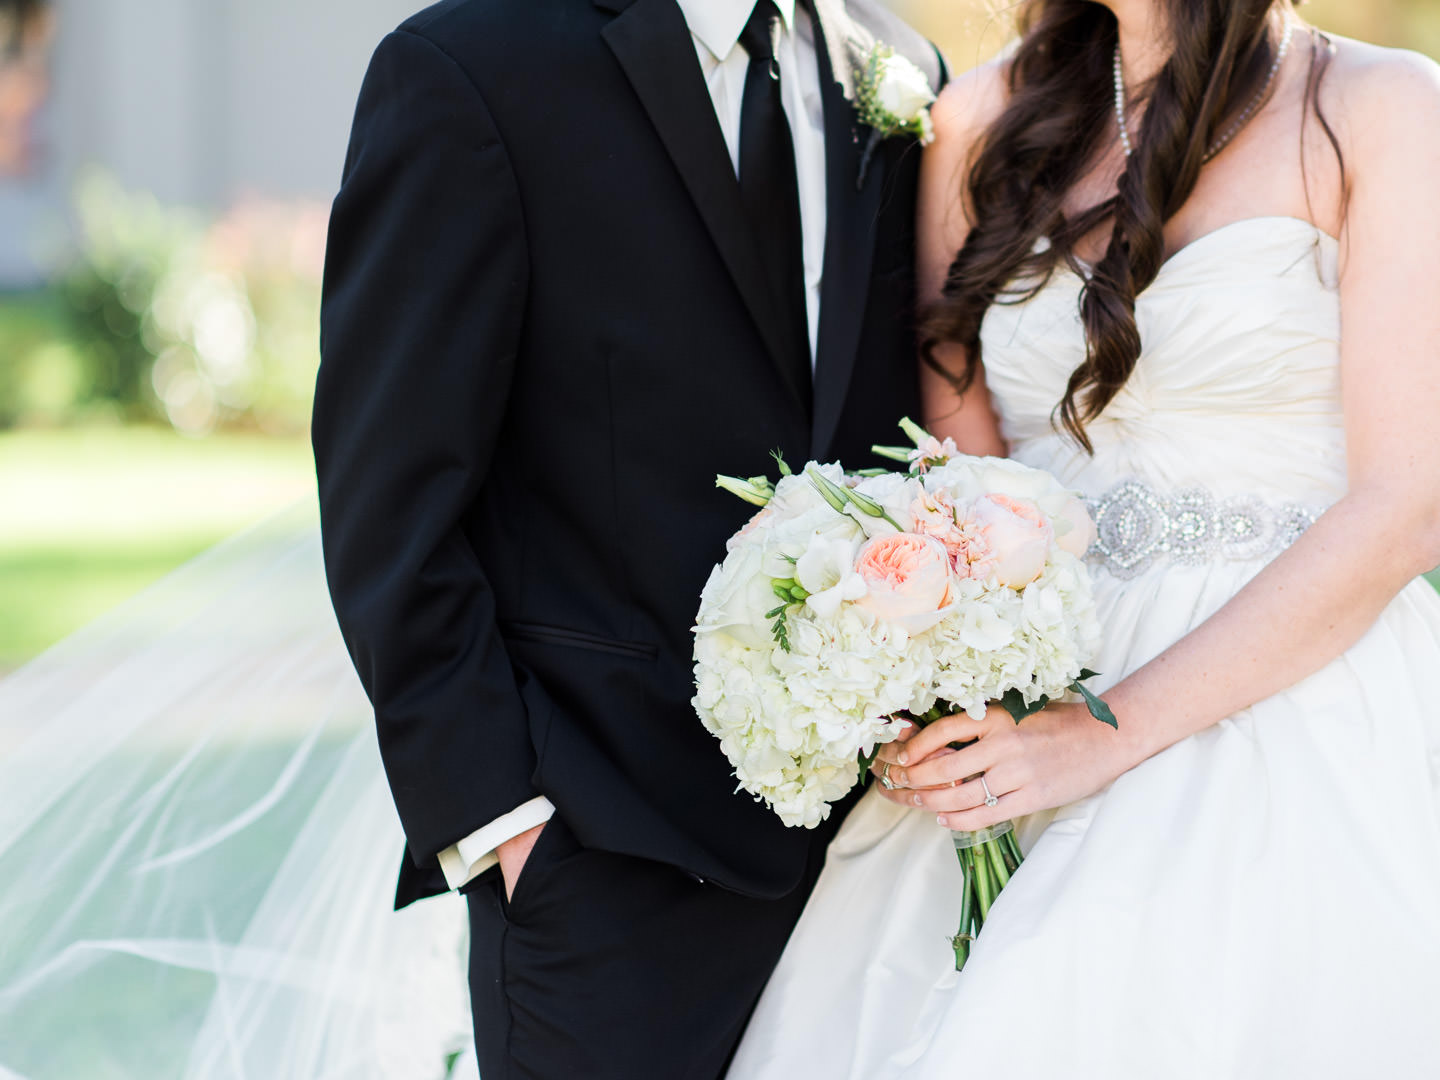 Groom with Black suit and tie and Bride with belt, coral juliette roses and hydrangeas